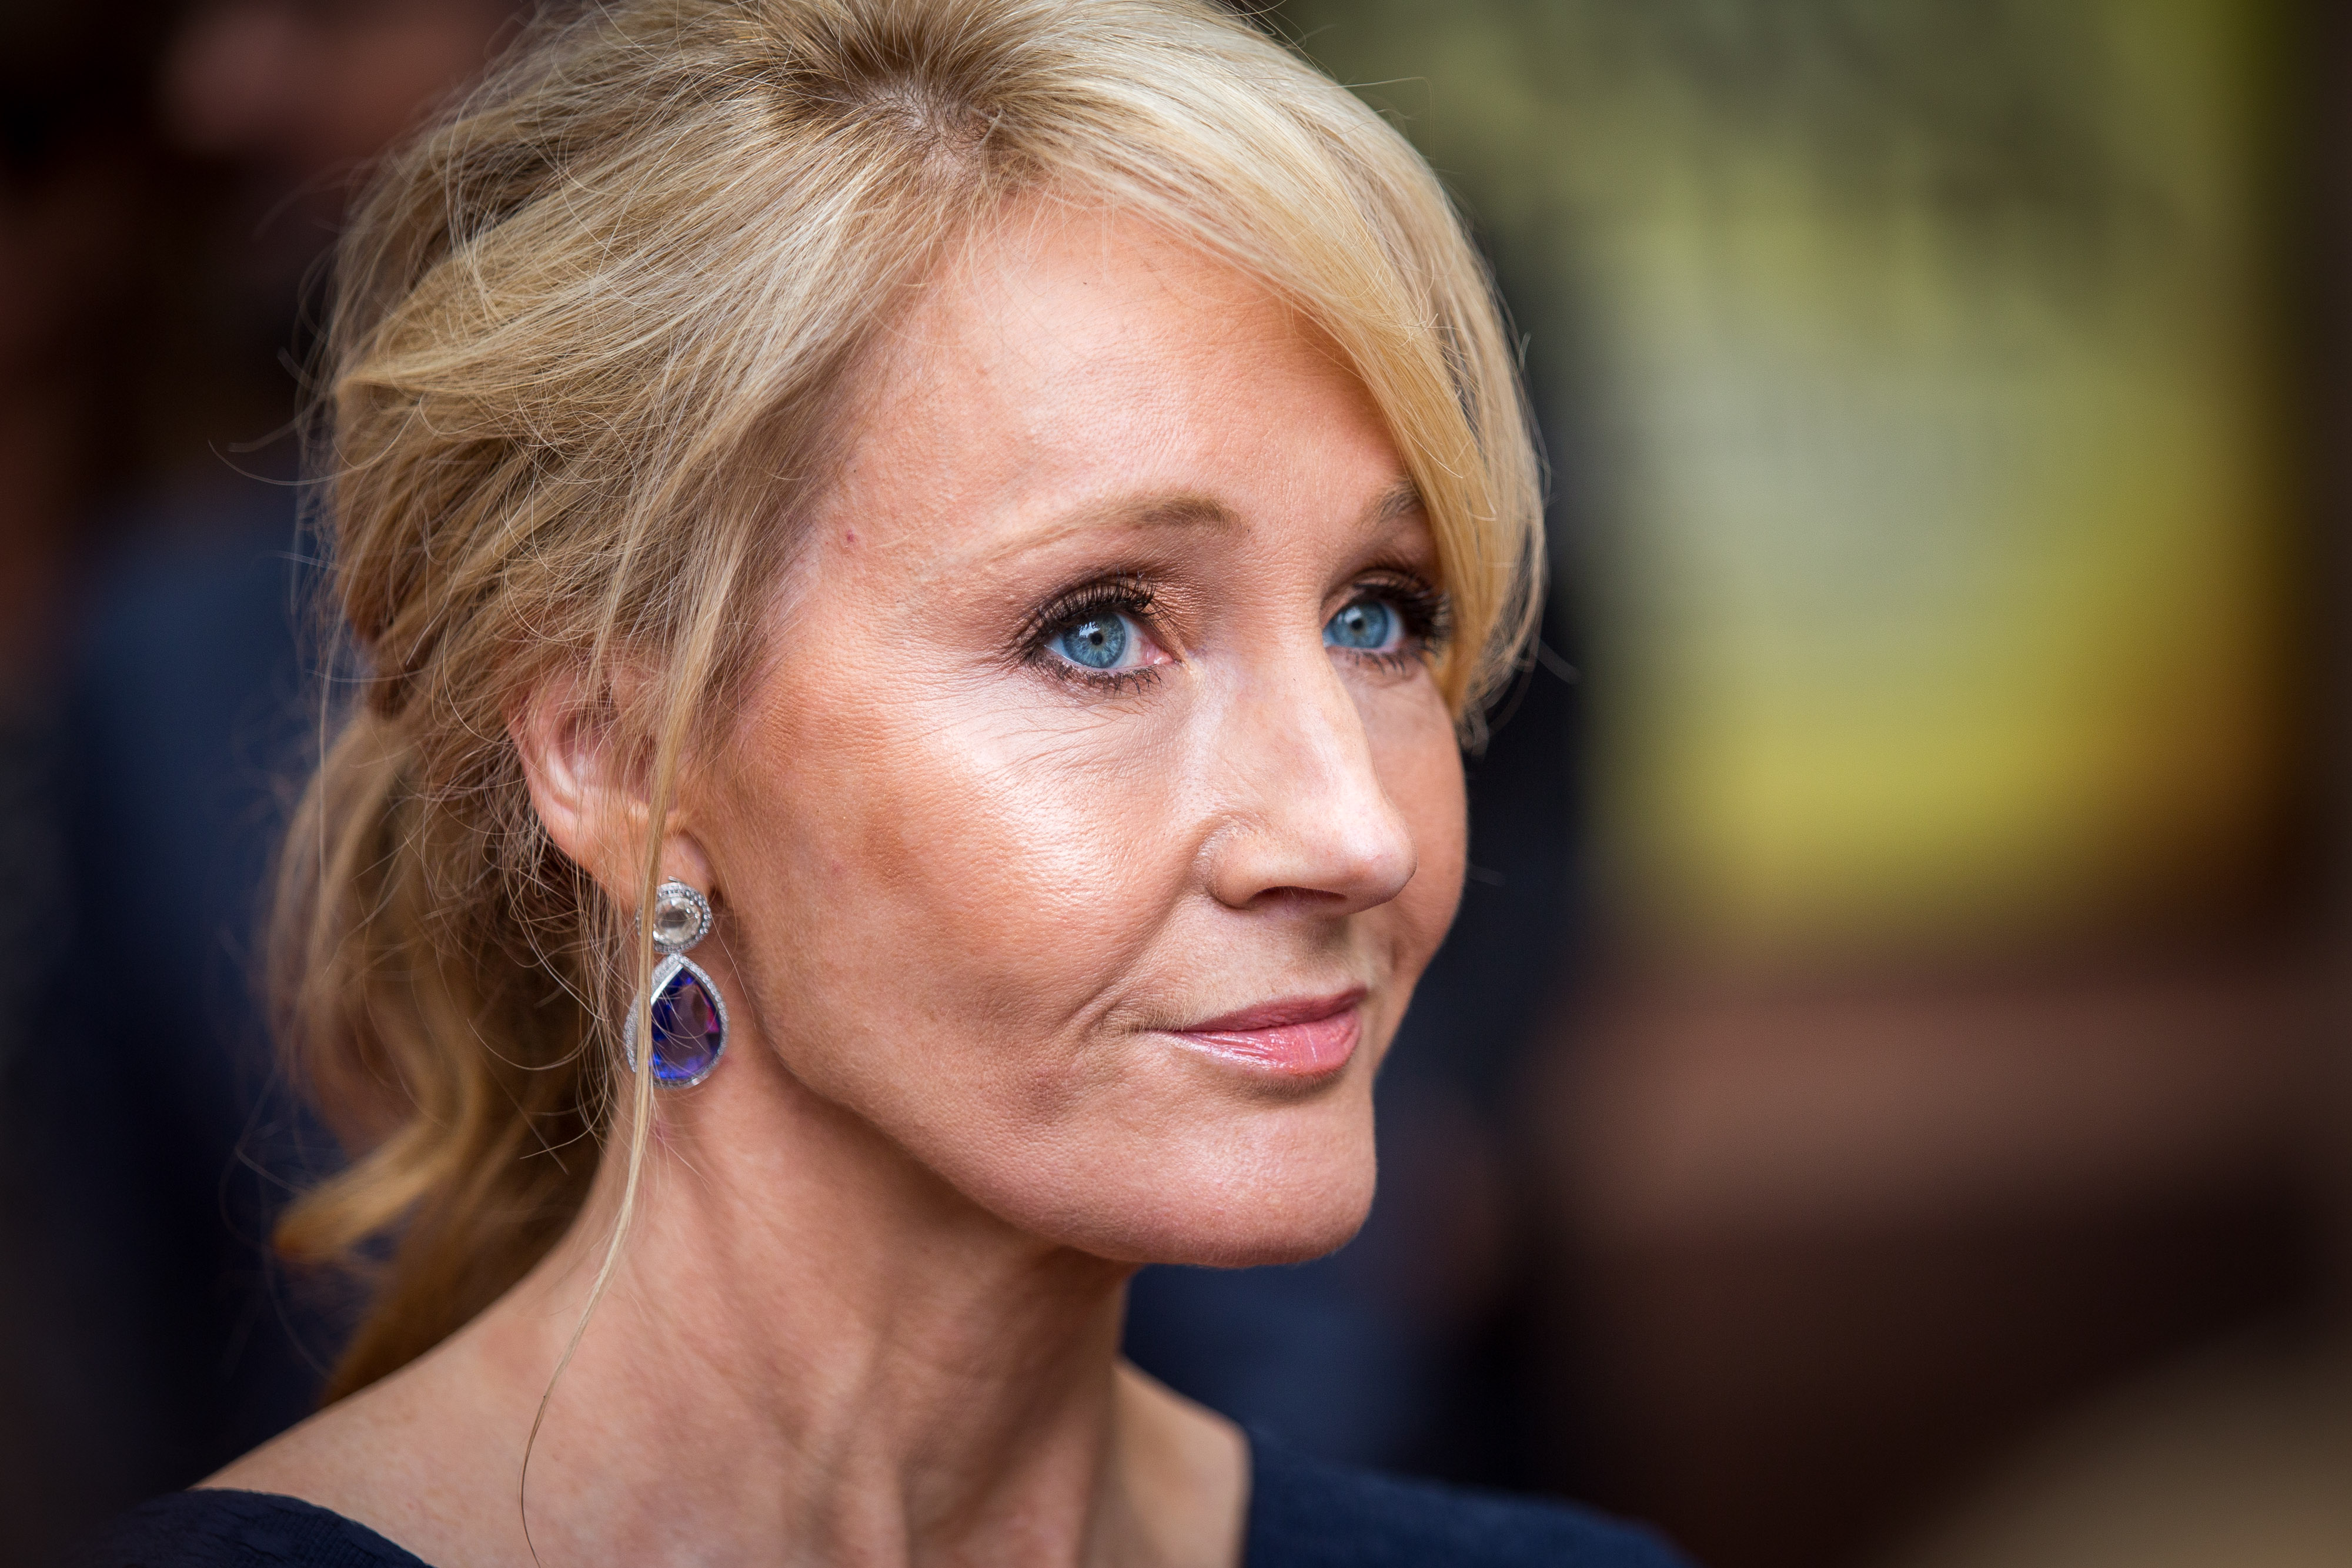 J. K. Rowling attends the press preview of "Harry Potter &amp; The Cursed Child" at Palace Theatre on July 30, 2016 in London, England. (Rob Stothard&mdash;Getty Images)